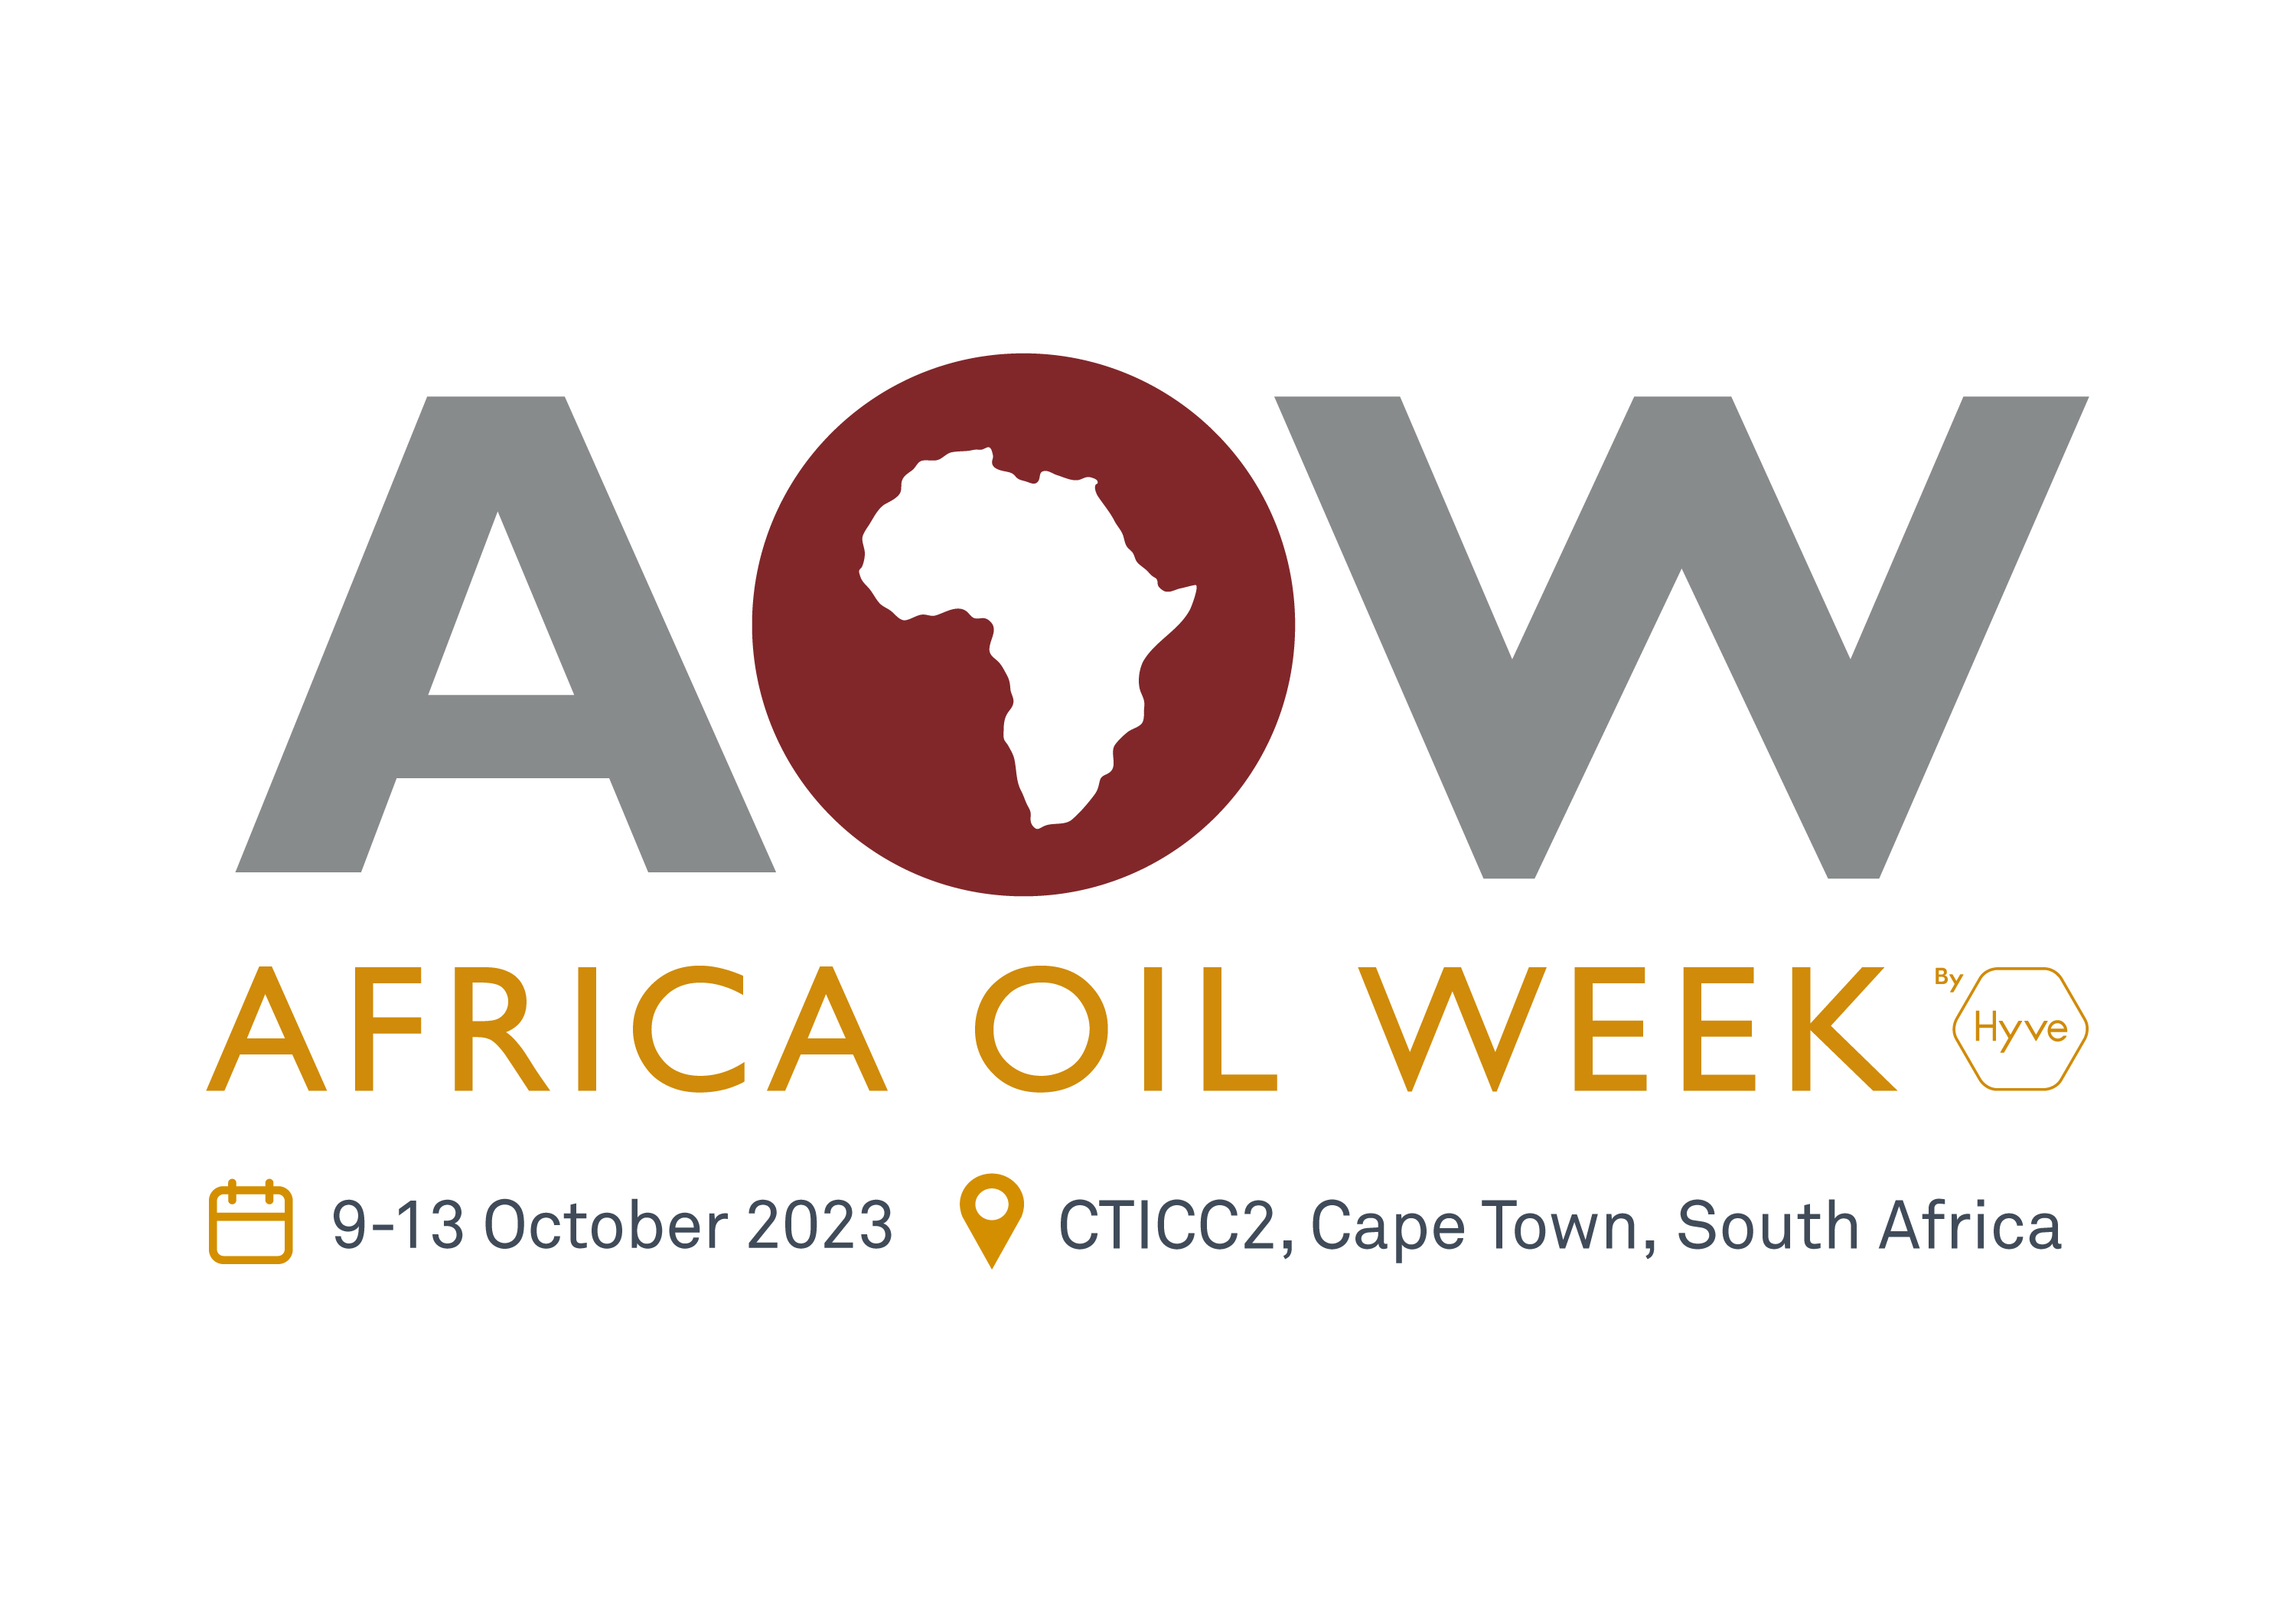 Africa Oil Week 2023 to welcome world leaders to South Africa (SA) to chart Africa’s energy destiny